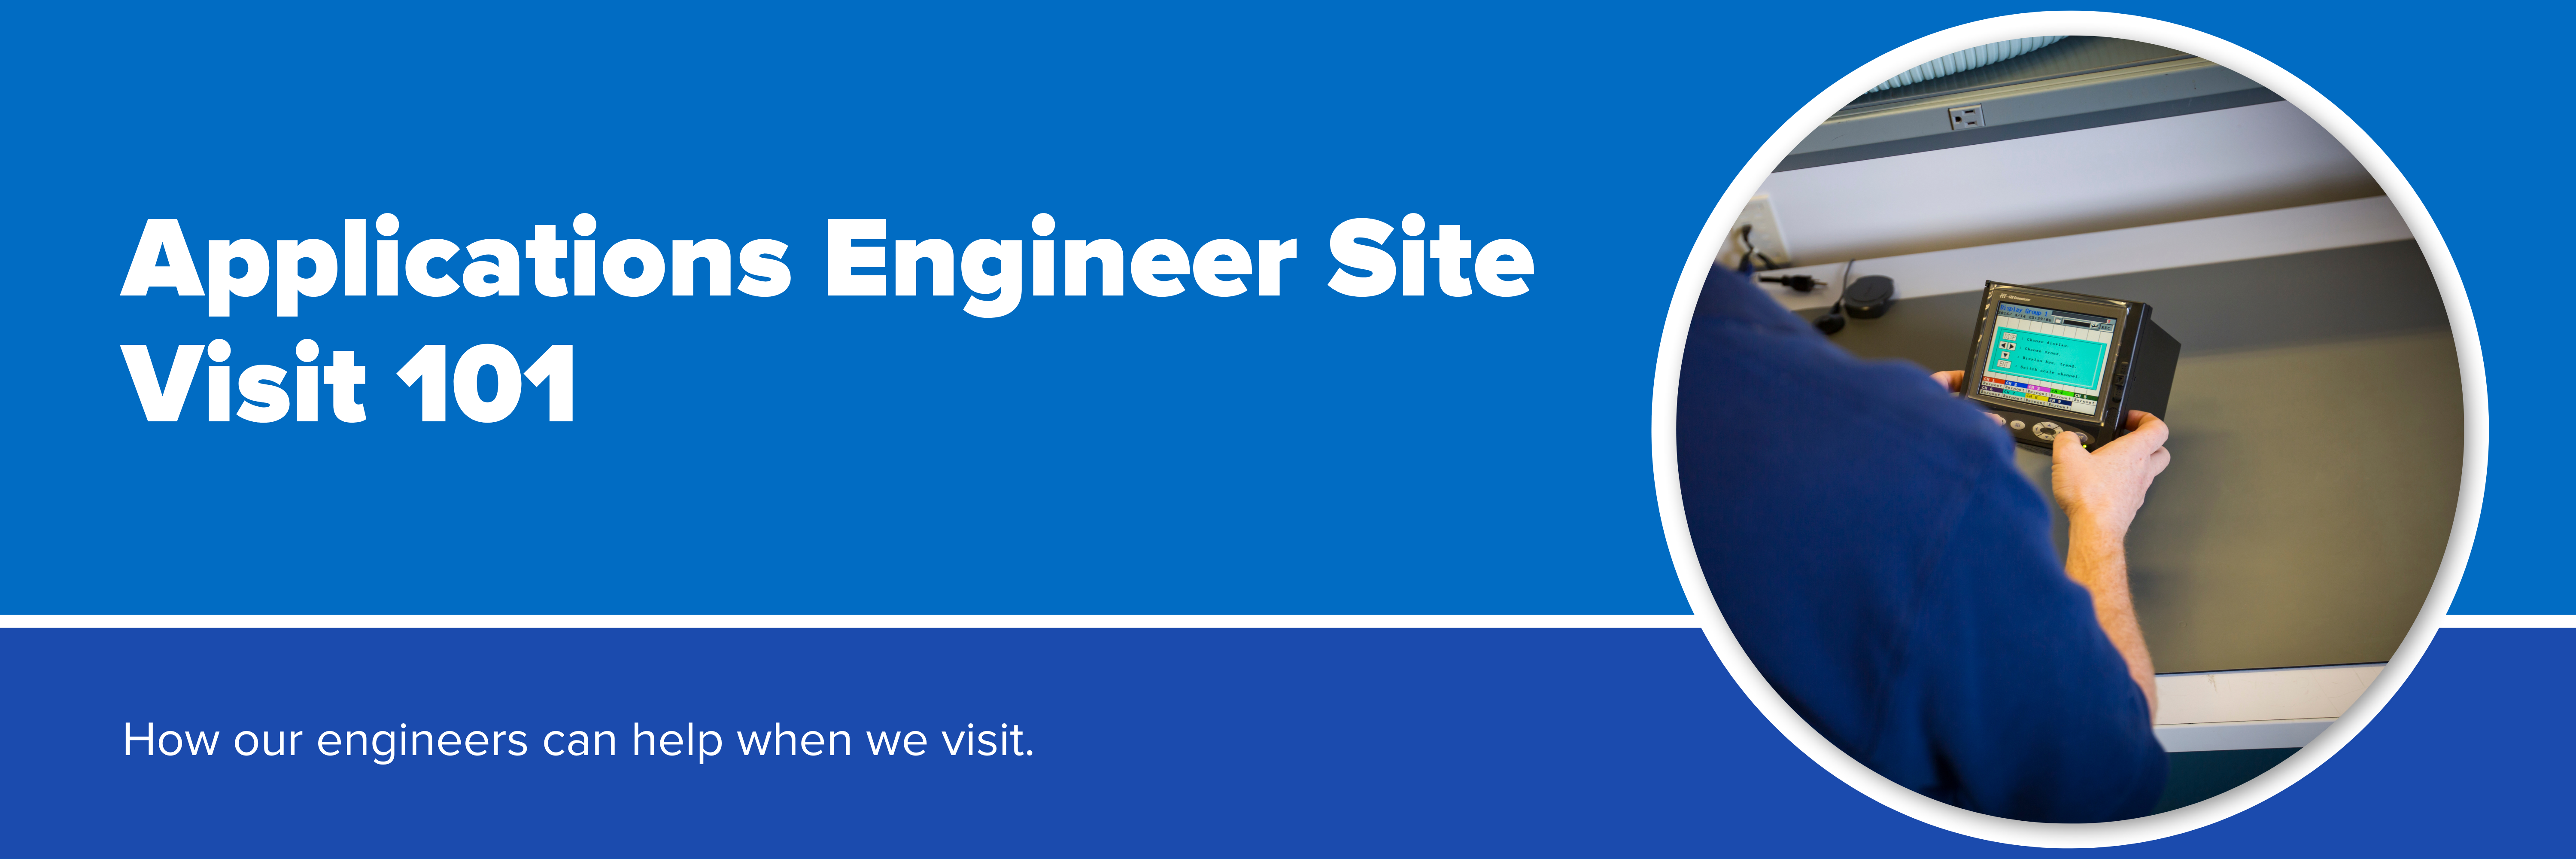 Header image with text "Applications Engineer Site Visit 101"